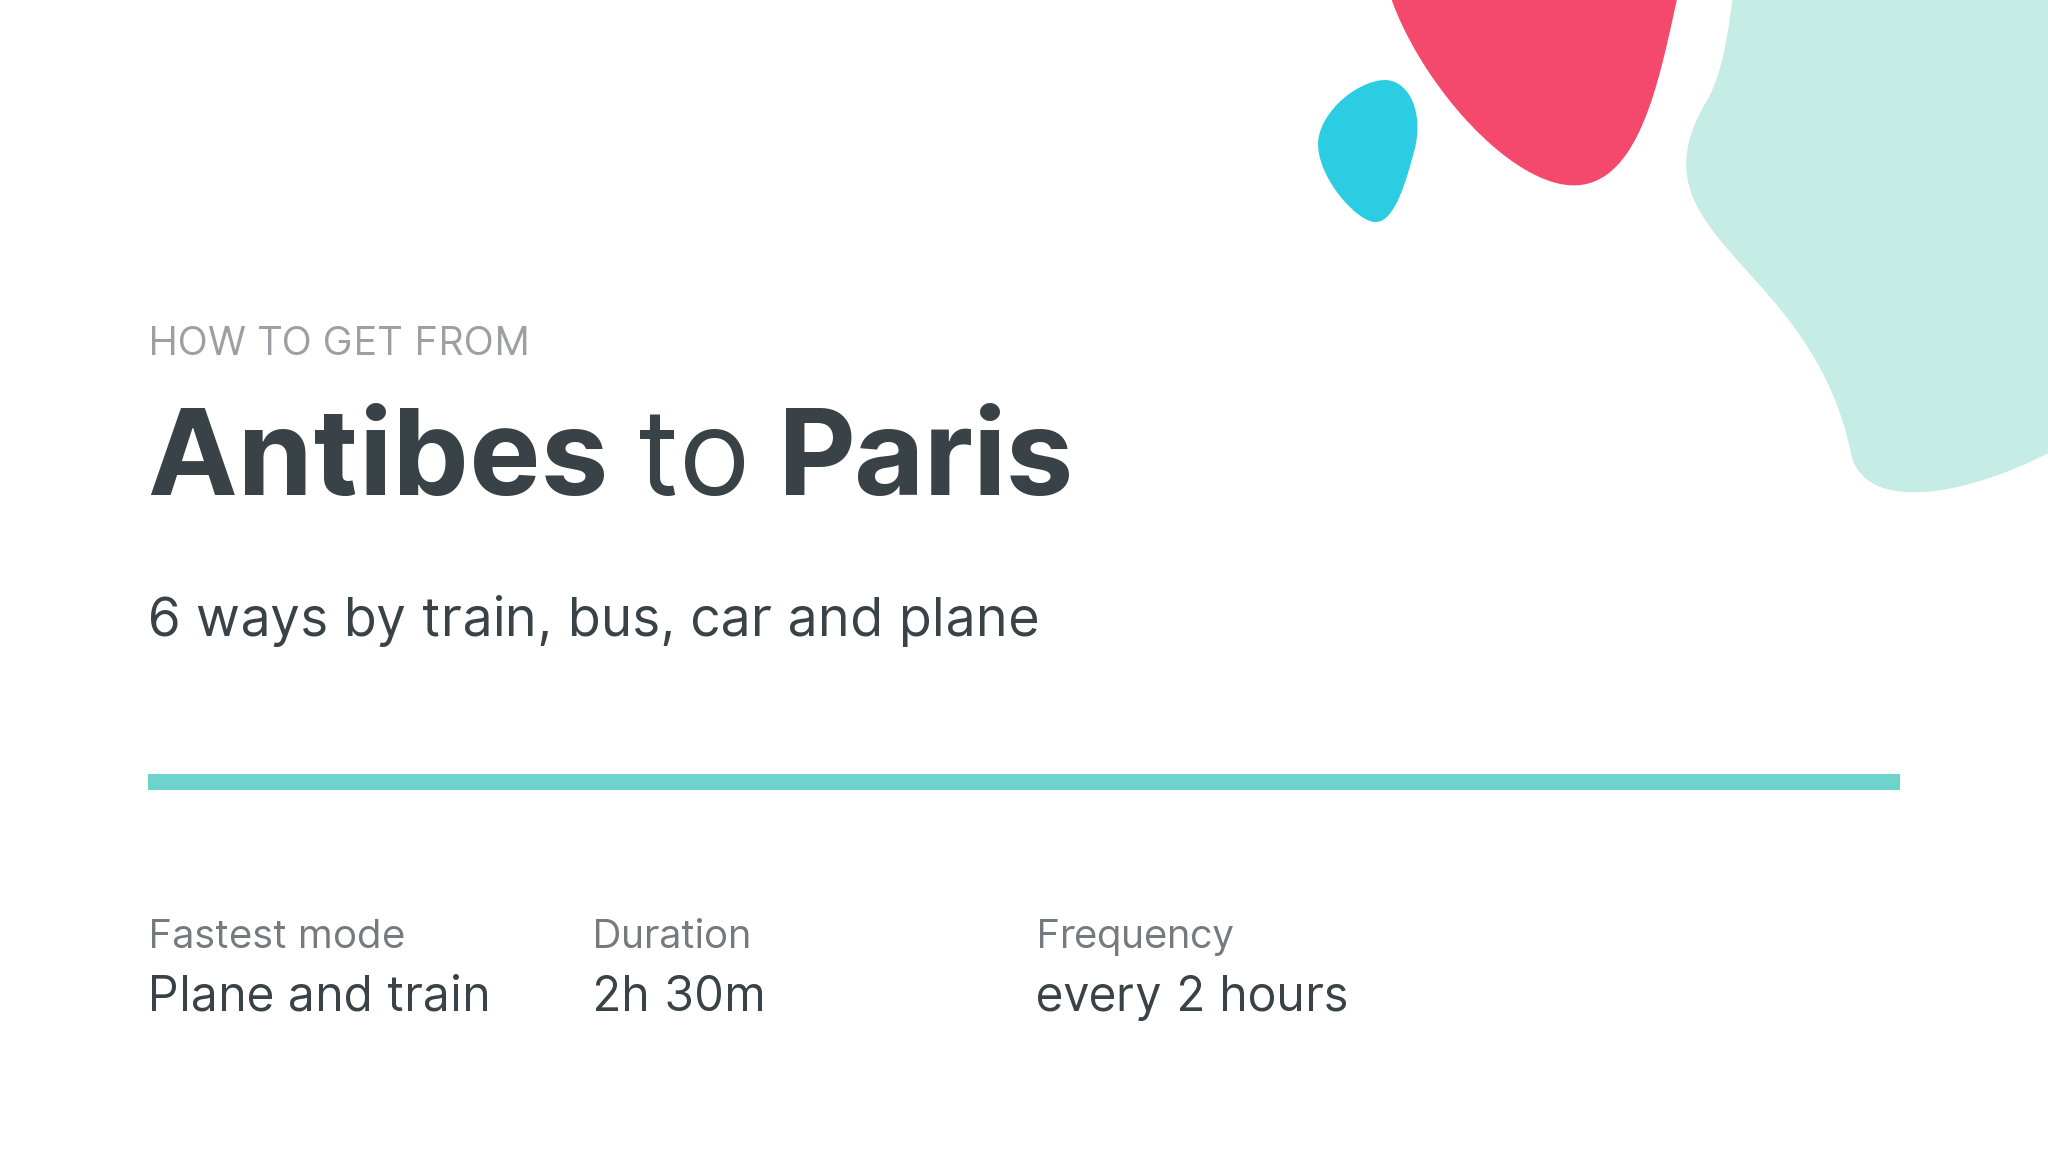 How do I get from Antibes to Paris